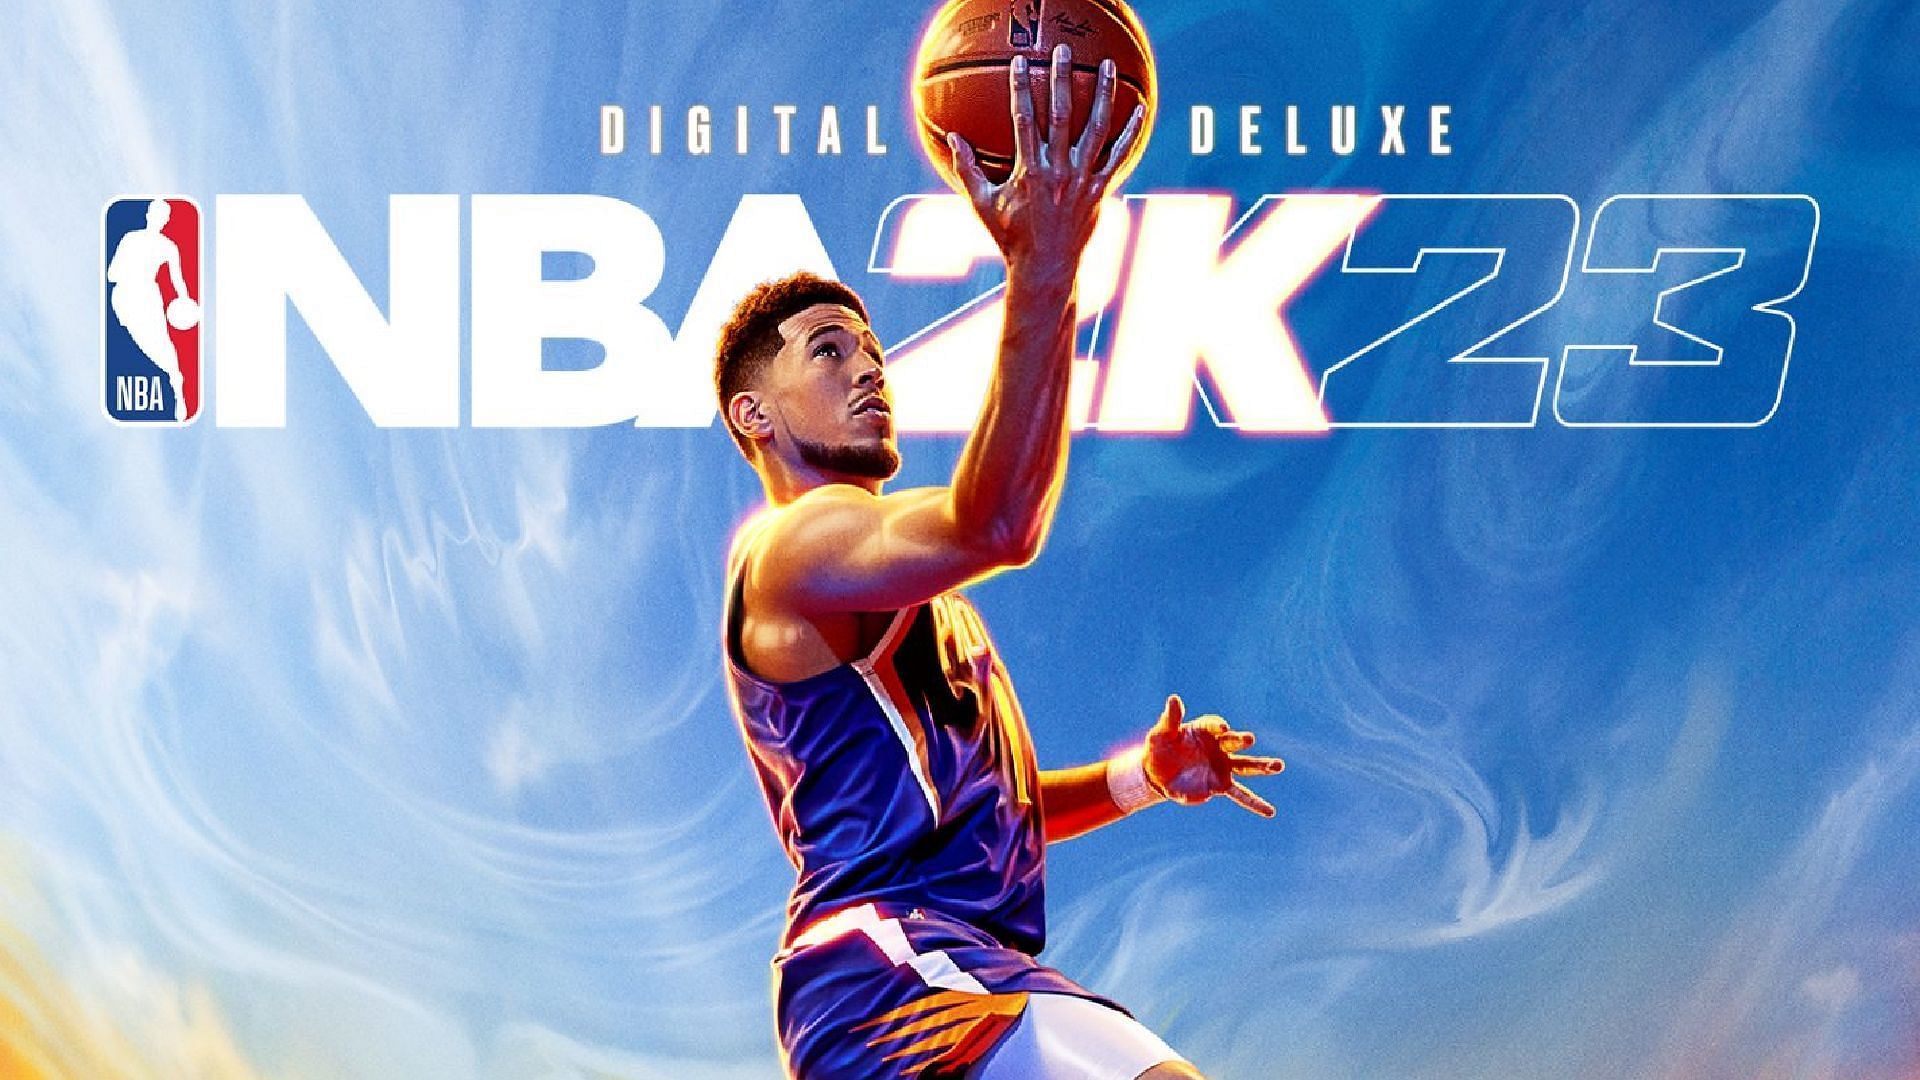 Devin Booker of the Phoenix Suns on the cover of NBA 2K23: Digital Deluxe Edition